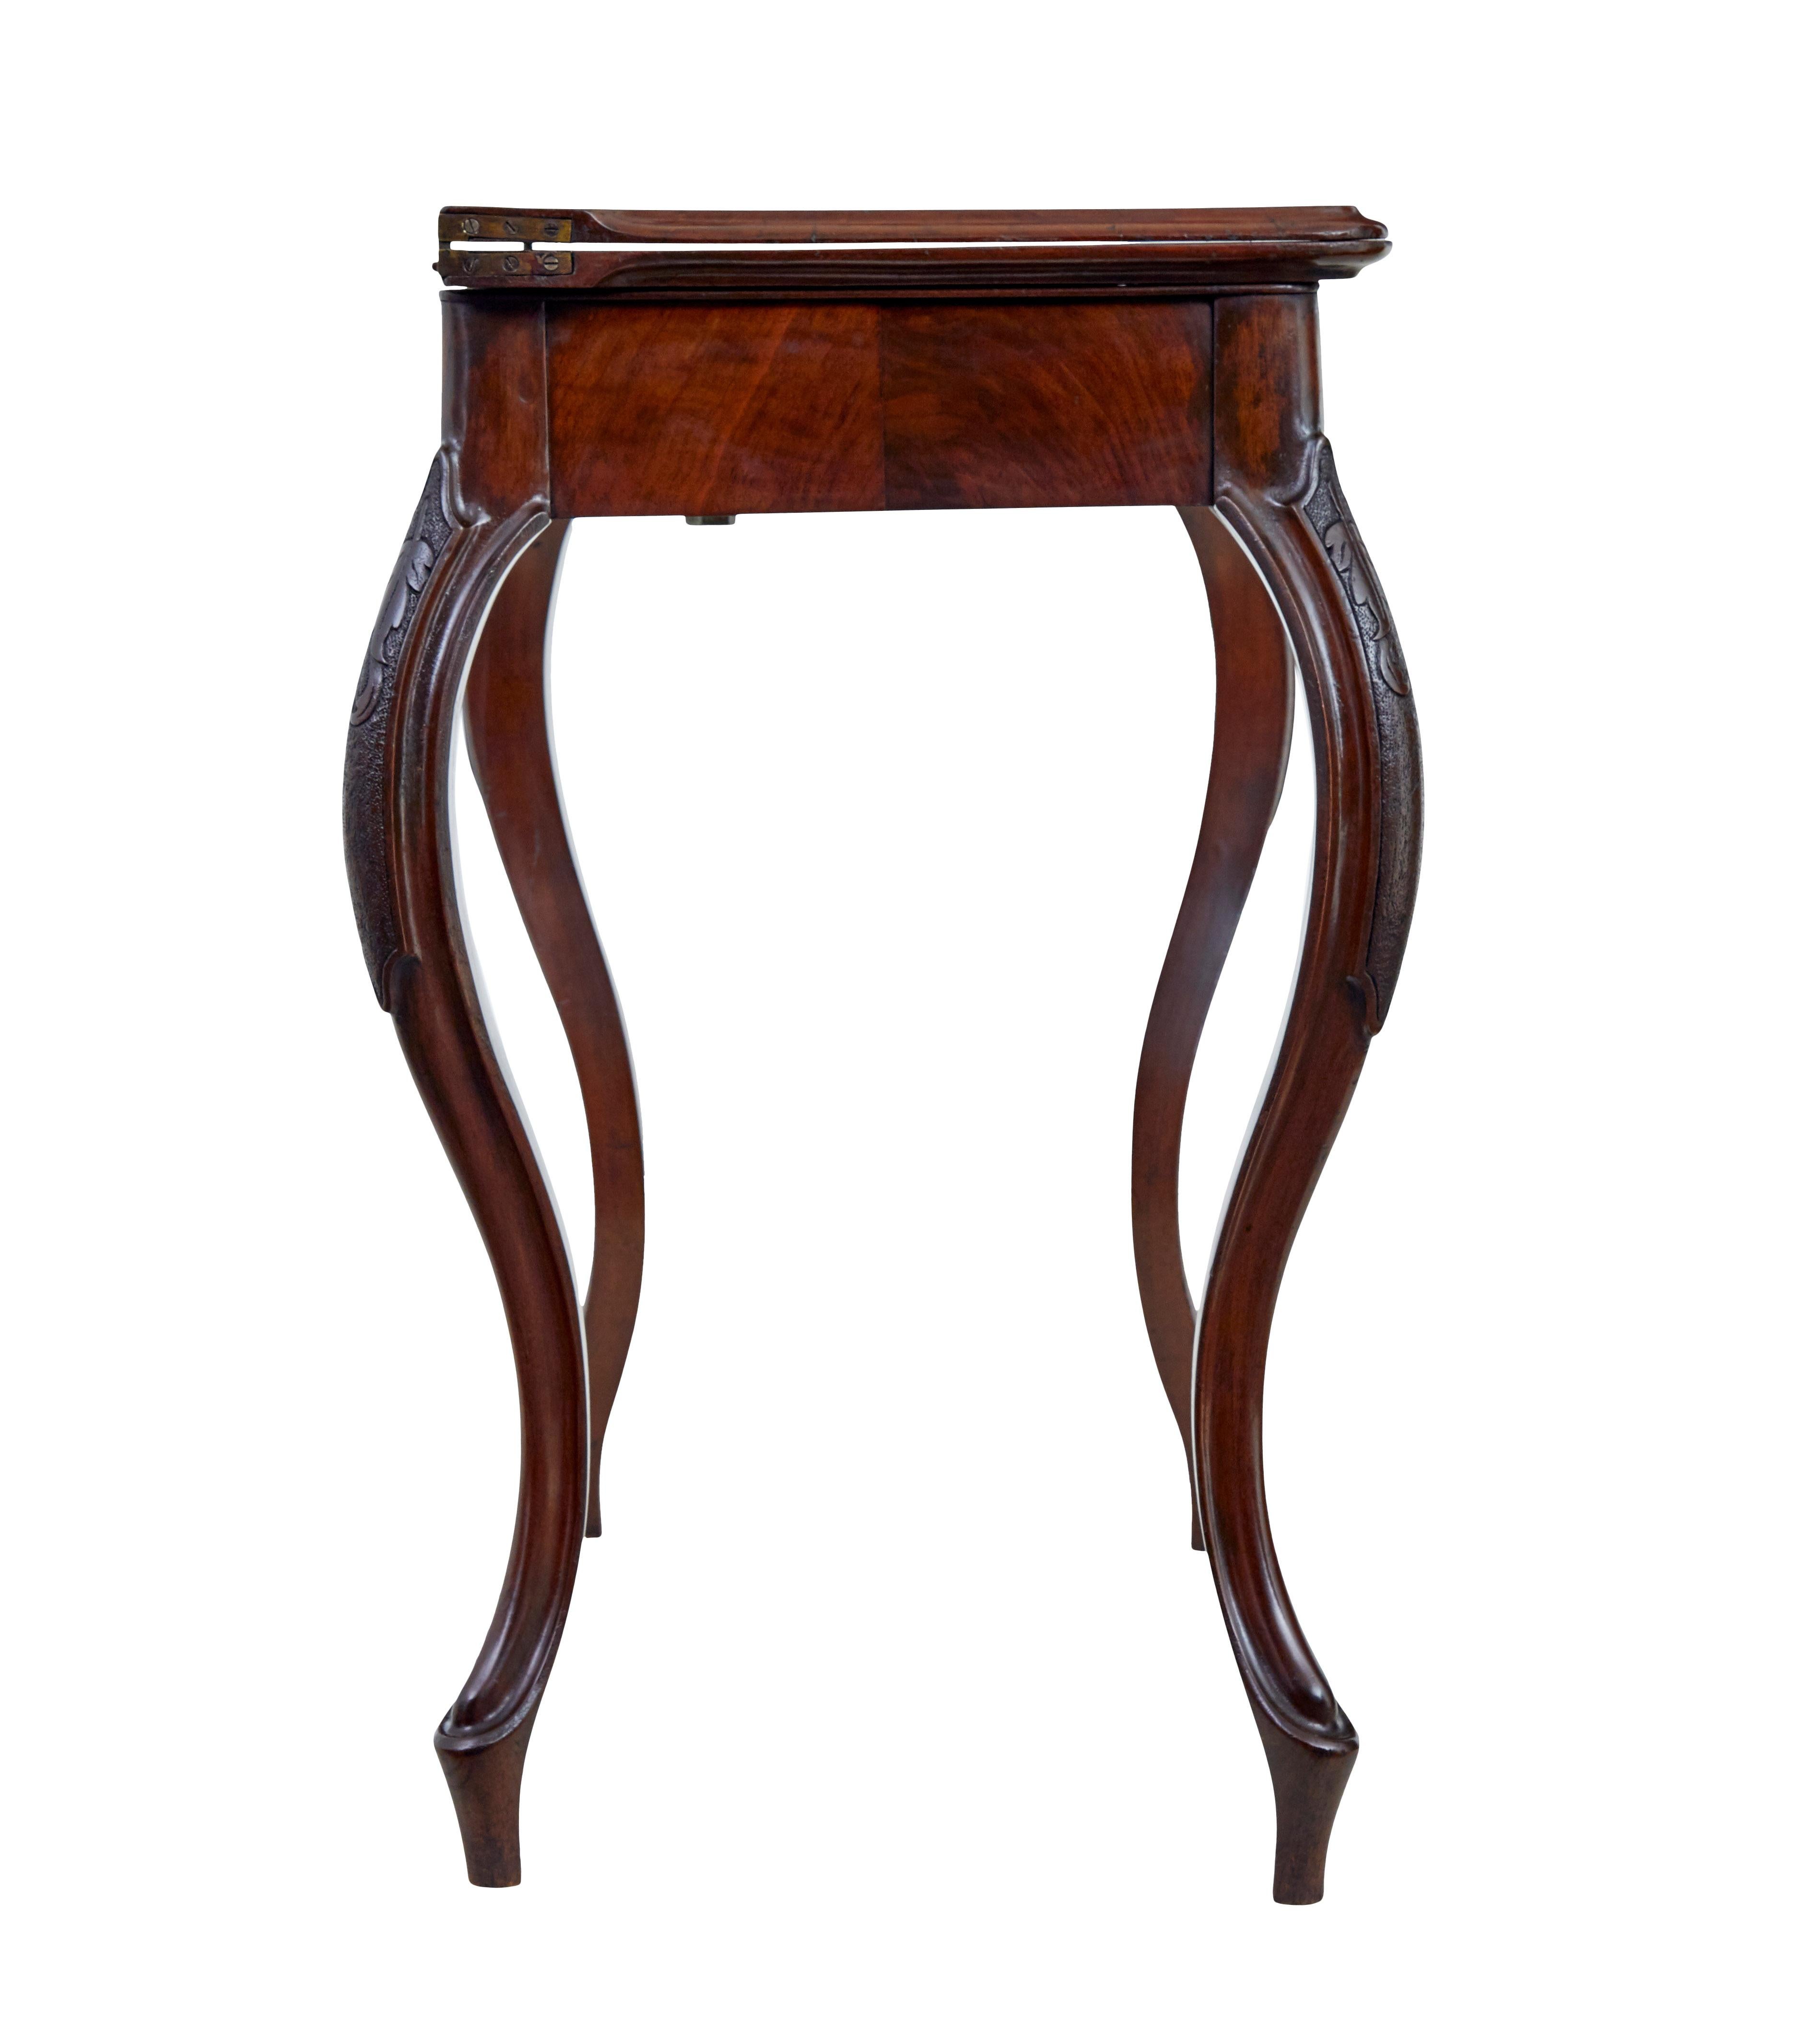 English 19th century carved mahogany games table